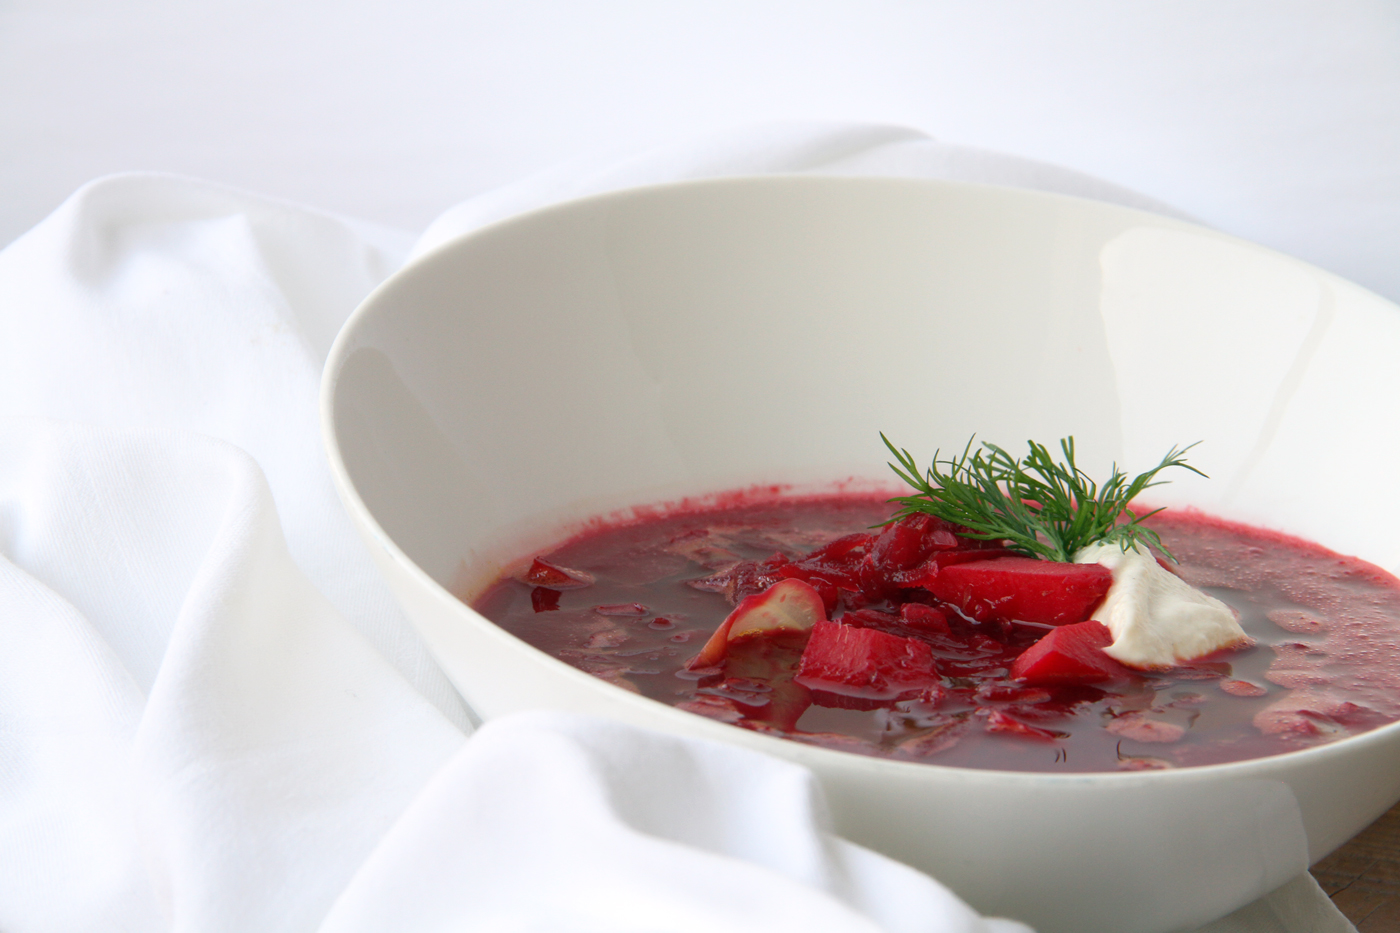 Vegetarian Red Beet Soup - Momma Chef